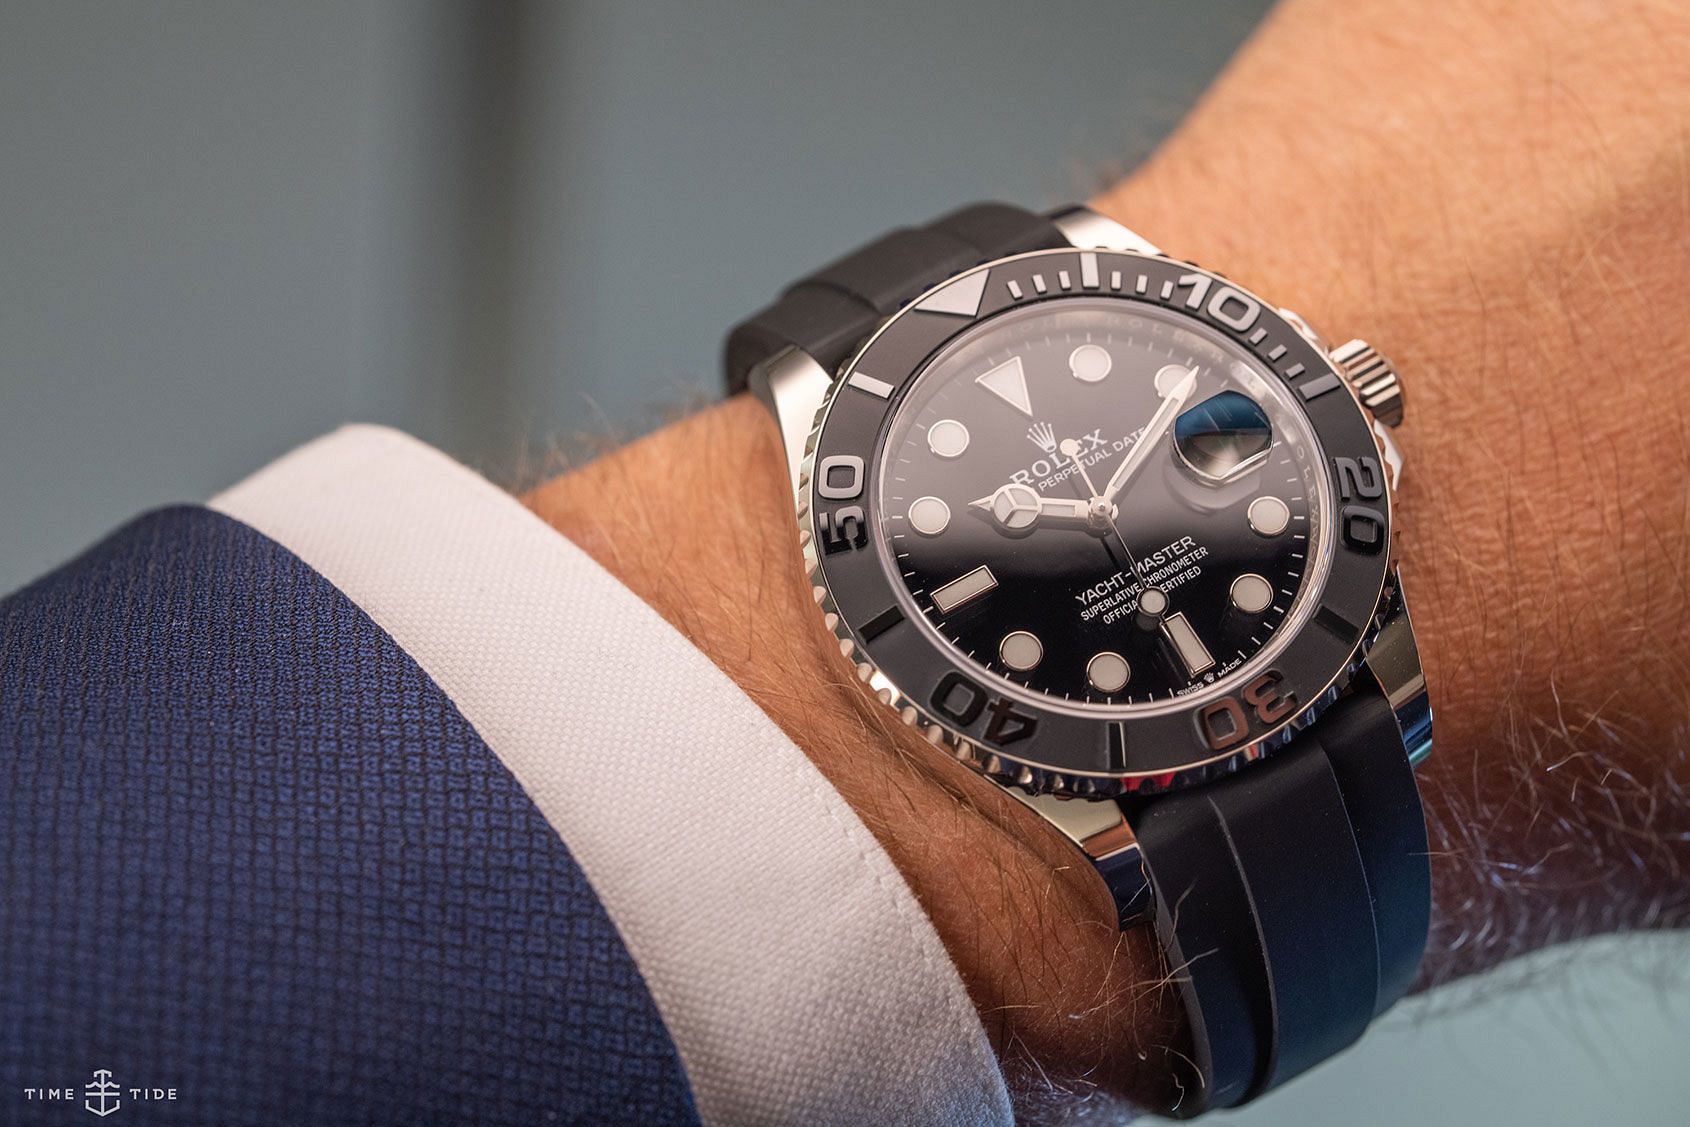 RECOMMENDED WATCHING: Rolex Yacht-Master Vs. Omega Seamaster